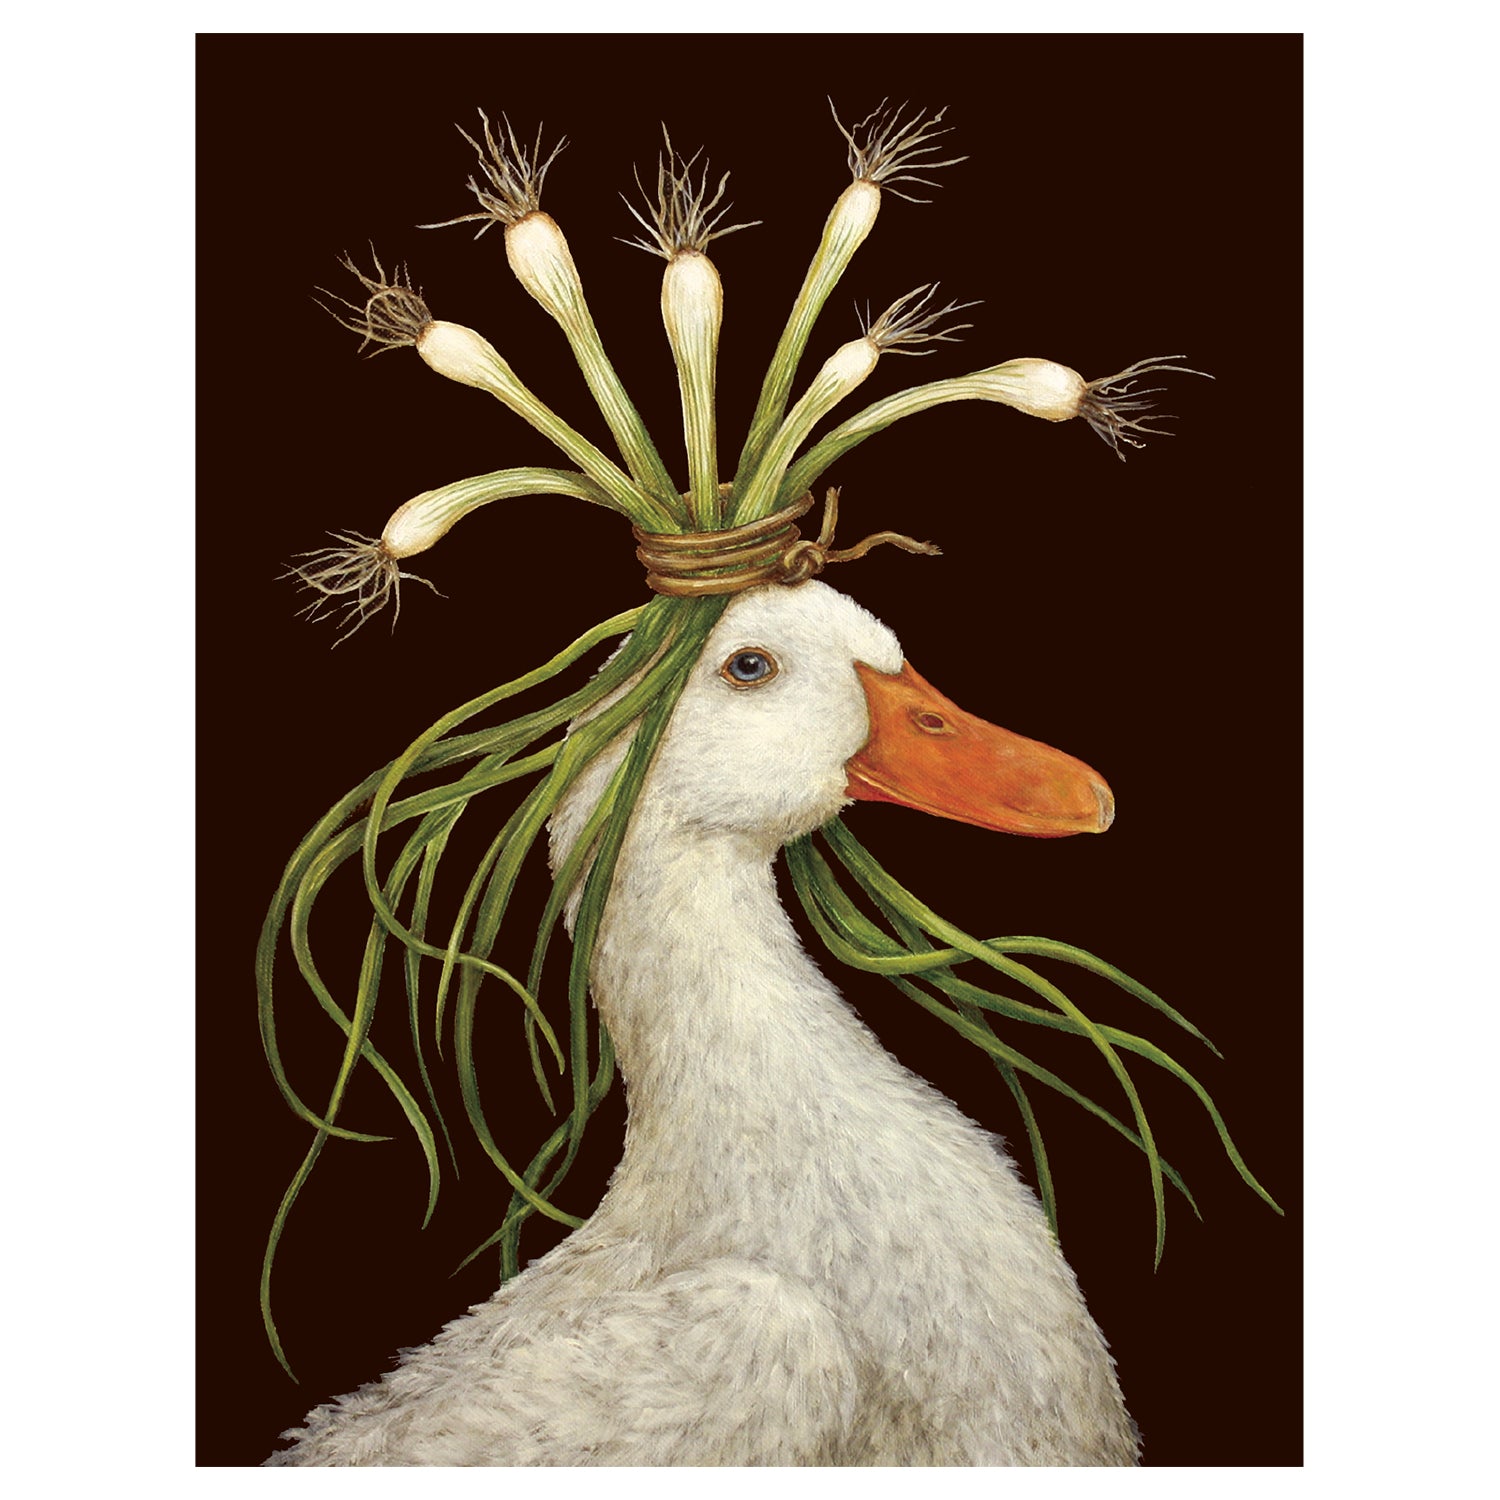 An artwork by Vicki Sawyer depicting a goose wearing a Miranda Card by Hester &amp; Cook on its head, proudly made in the USA.